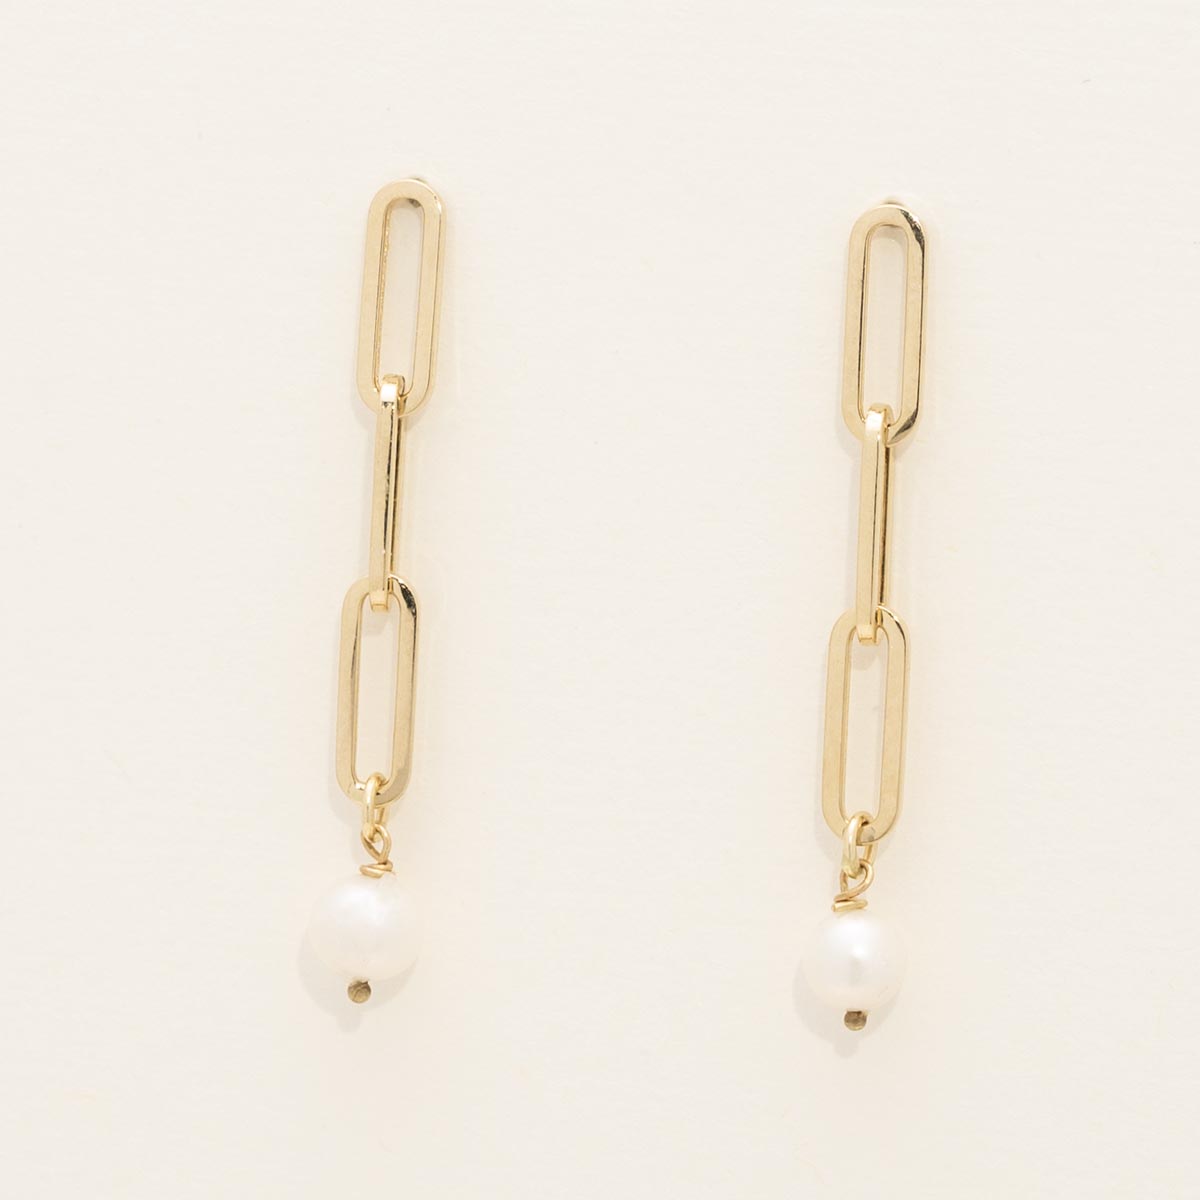 Cultured Freshwater Pearl Drop Earrings in 14kt Yellow Gold (6mm pearls)